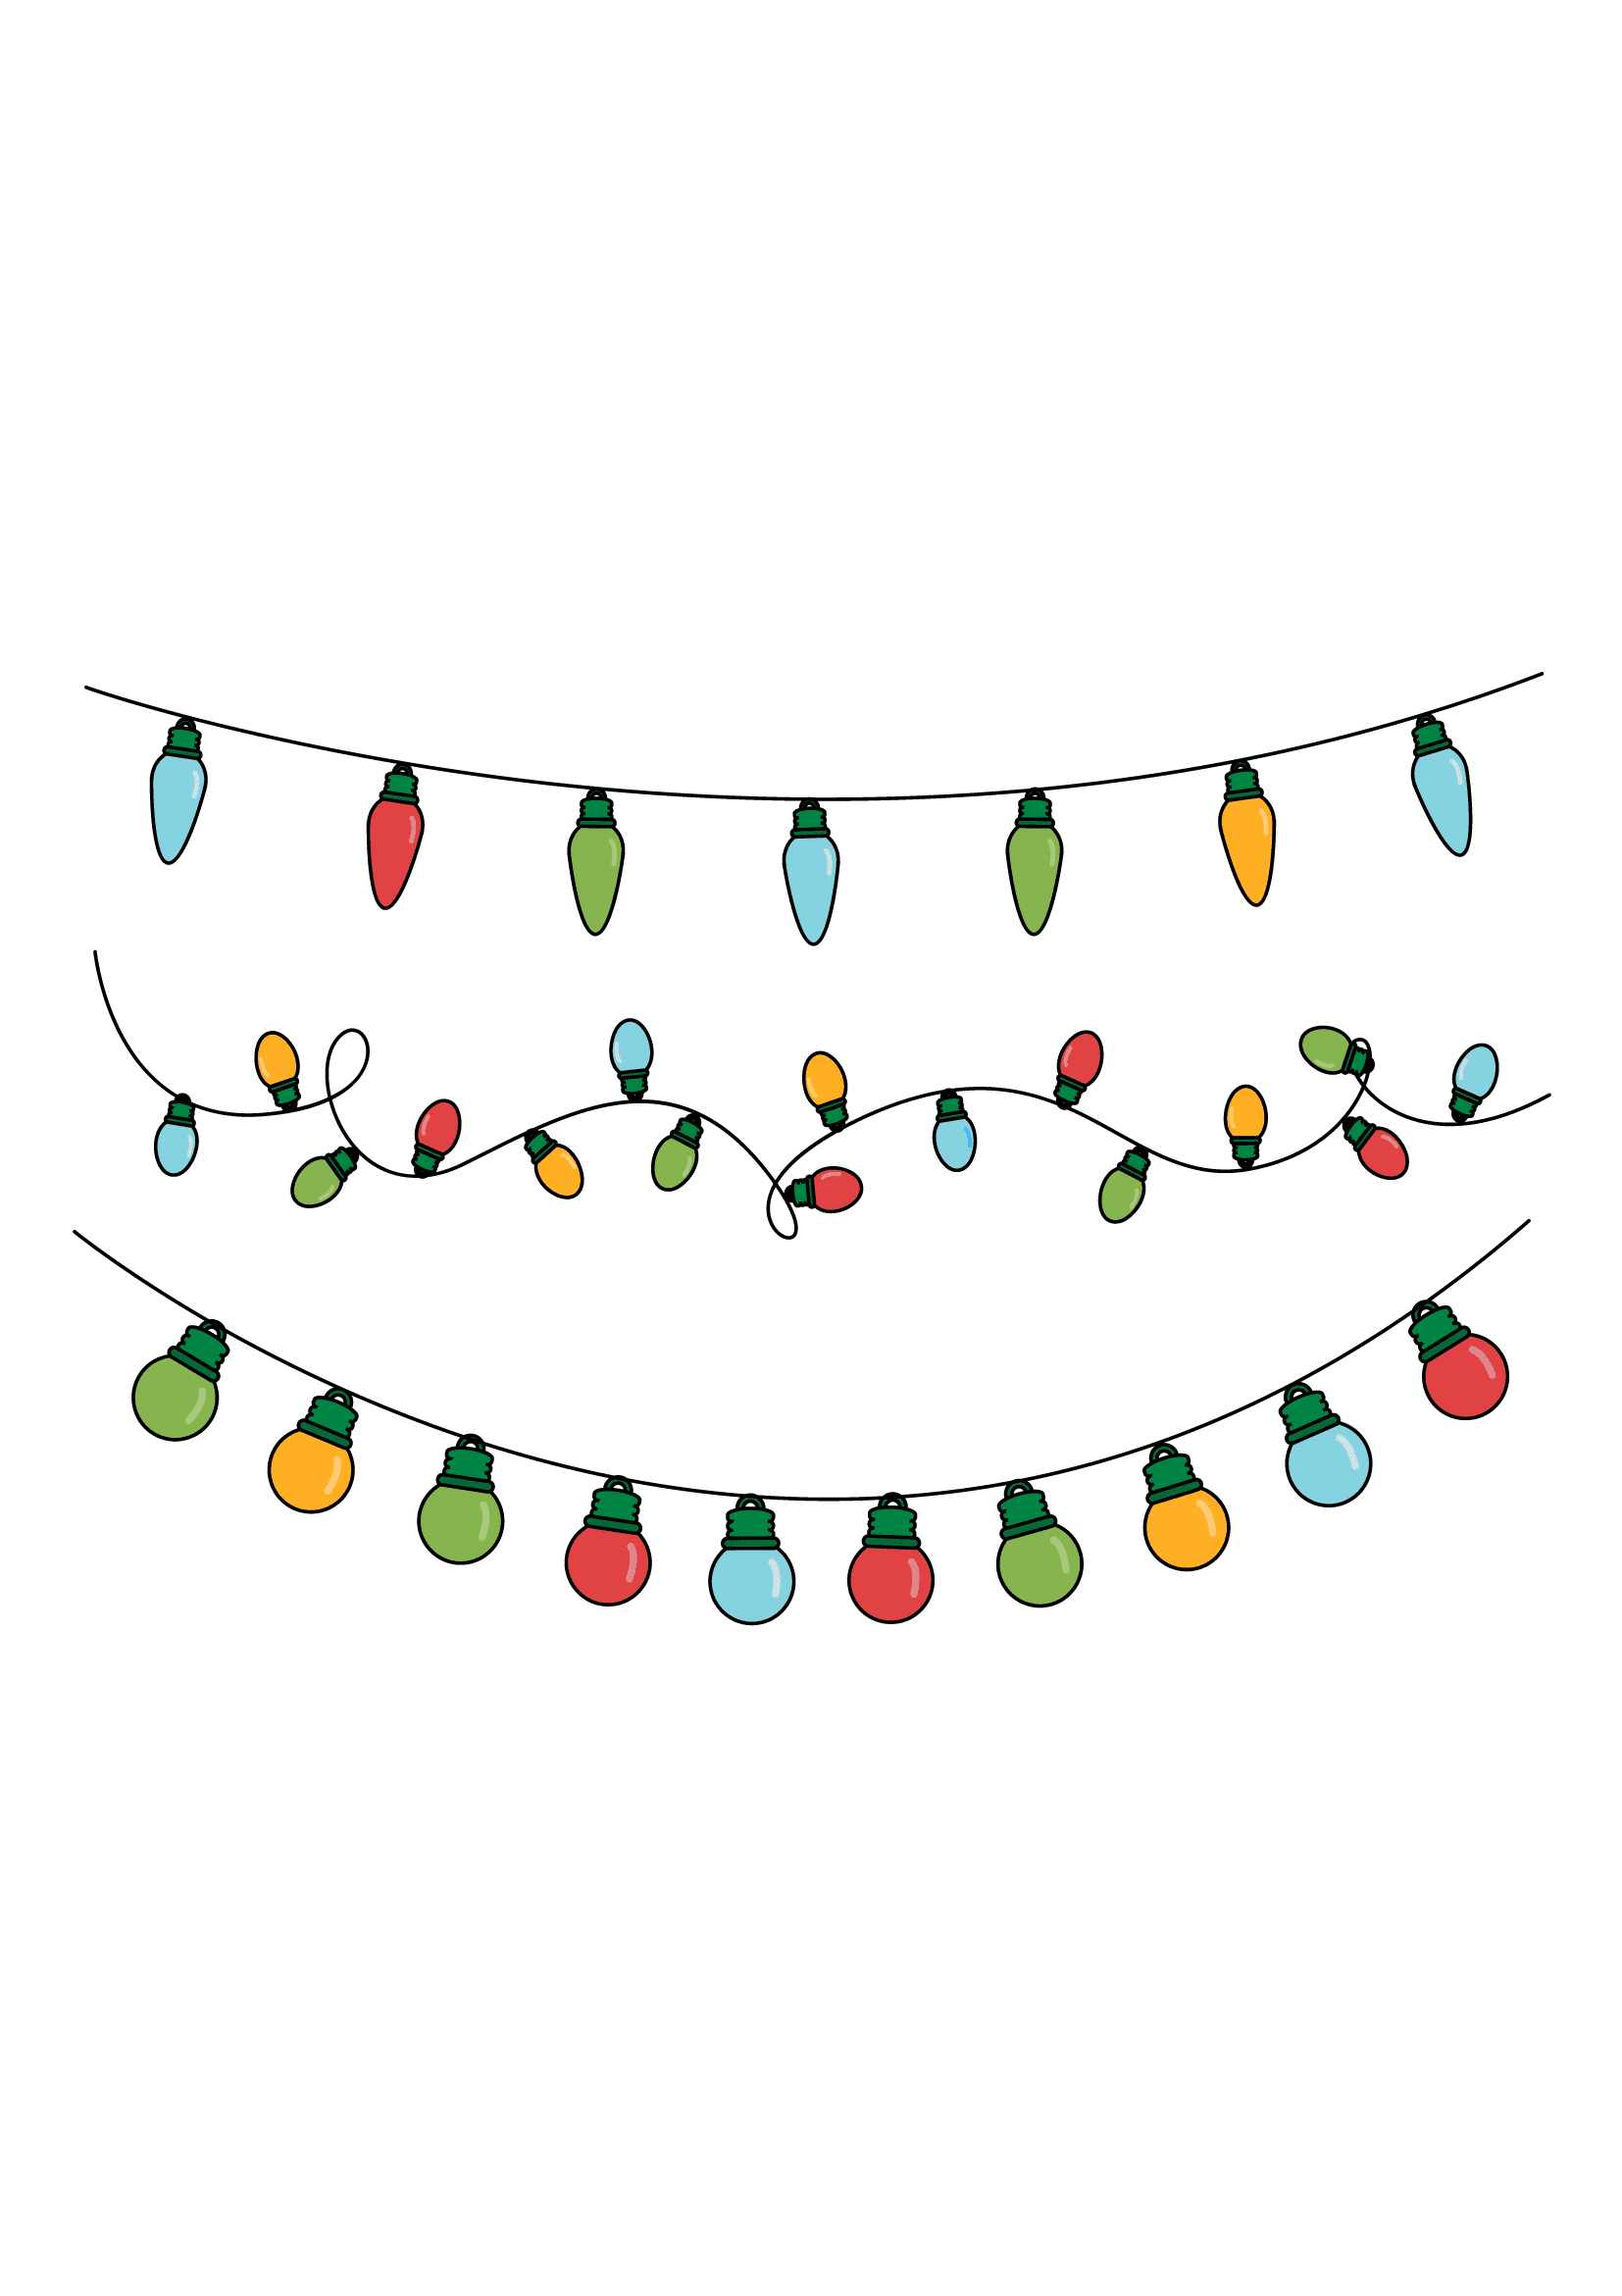 How to Draw Christmas Lights Step by Step Printable